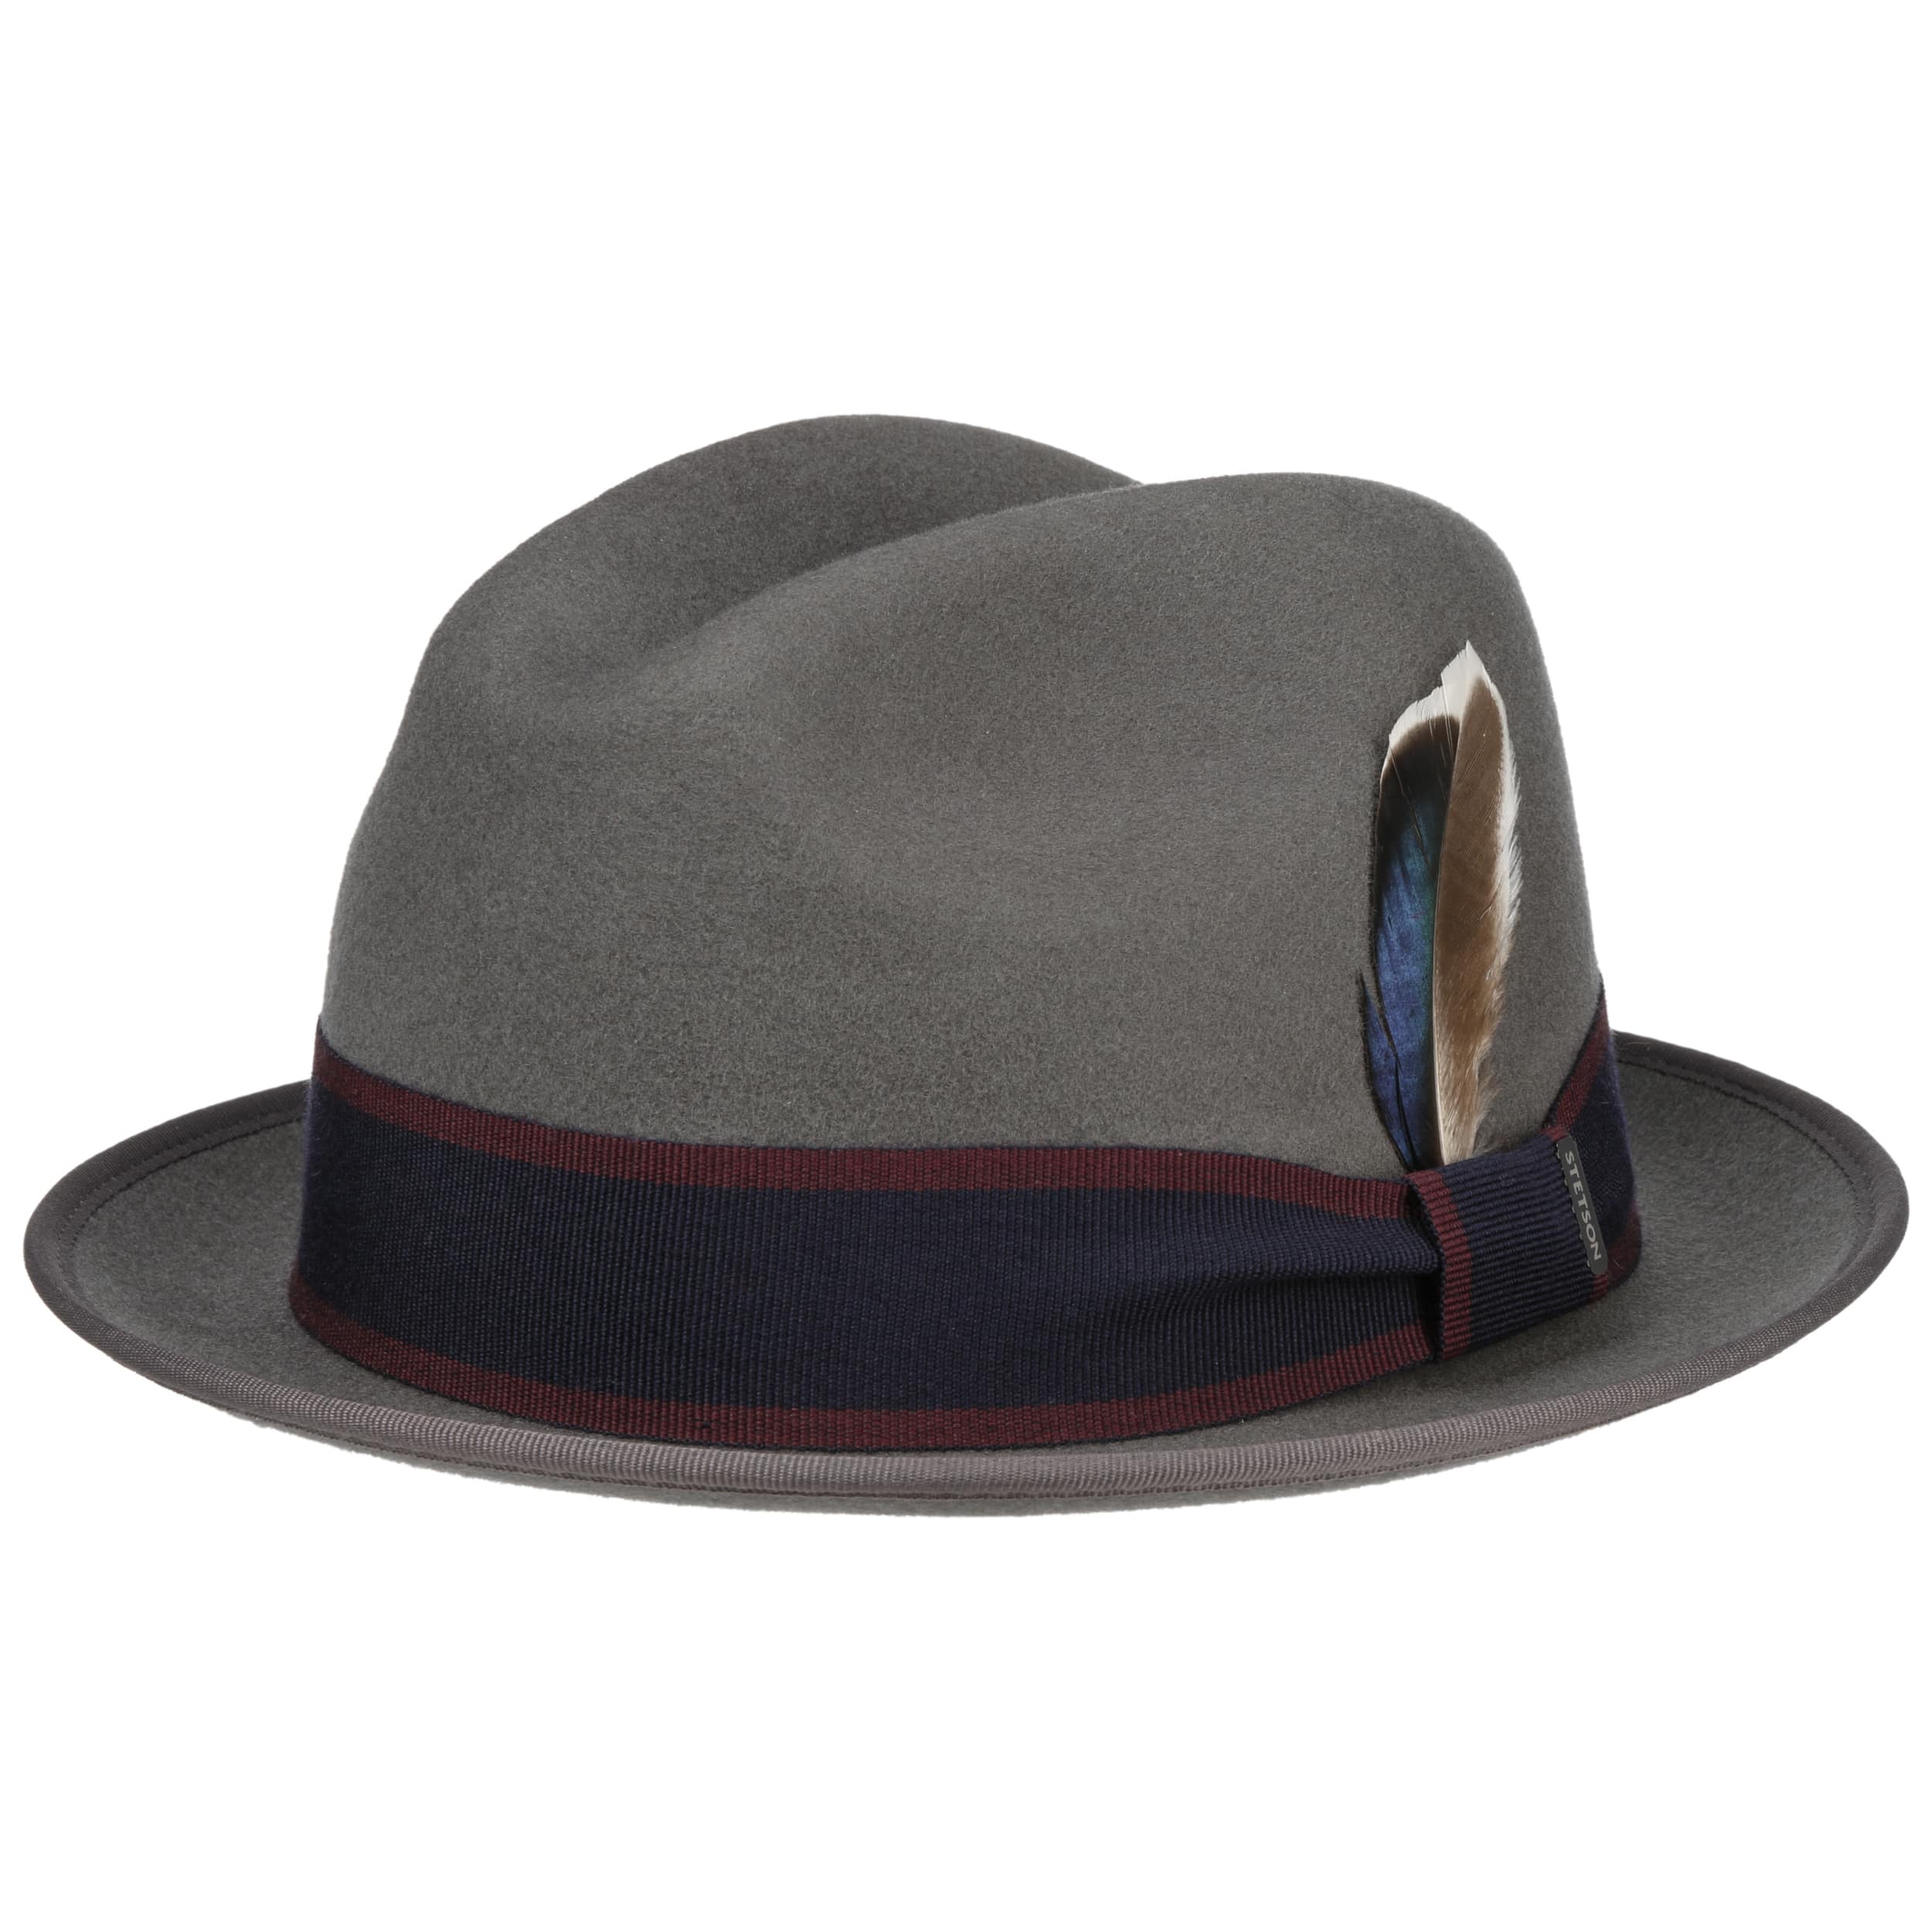 Rockwell Player Wool Hat by Stetson - 149,00 €